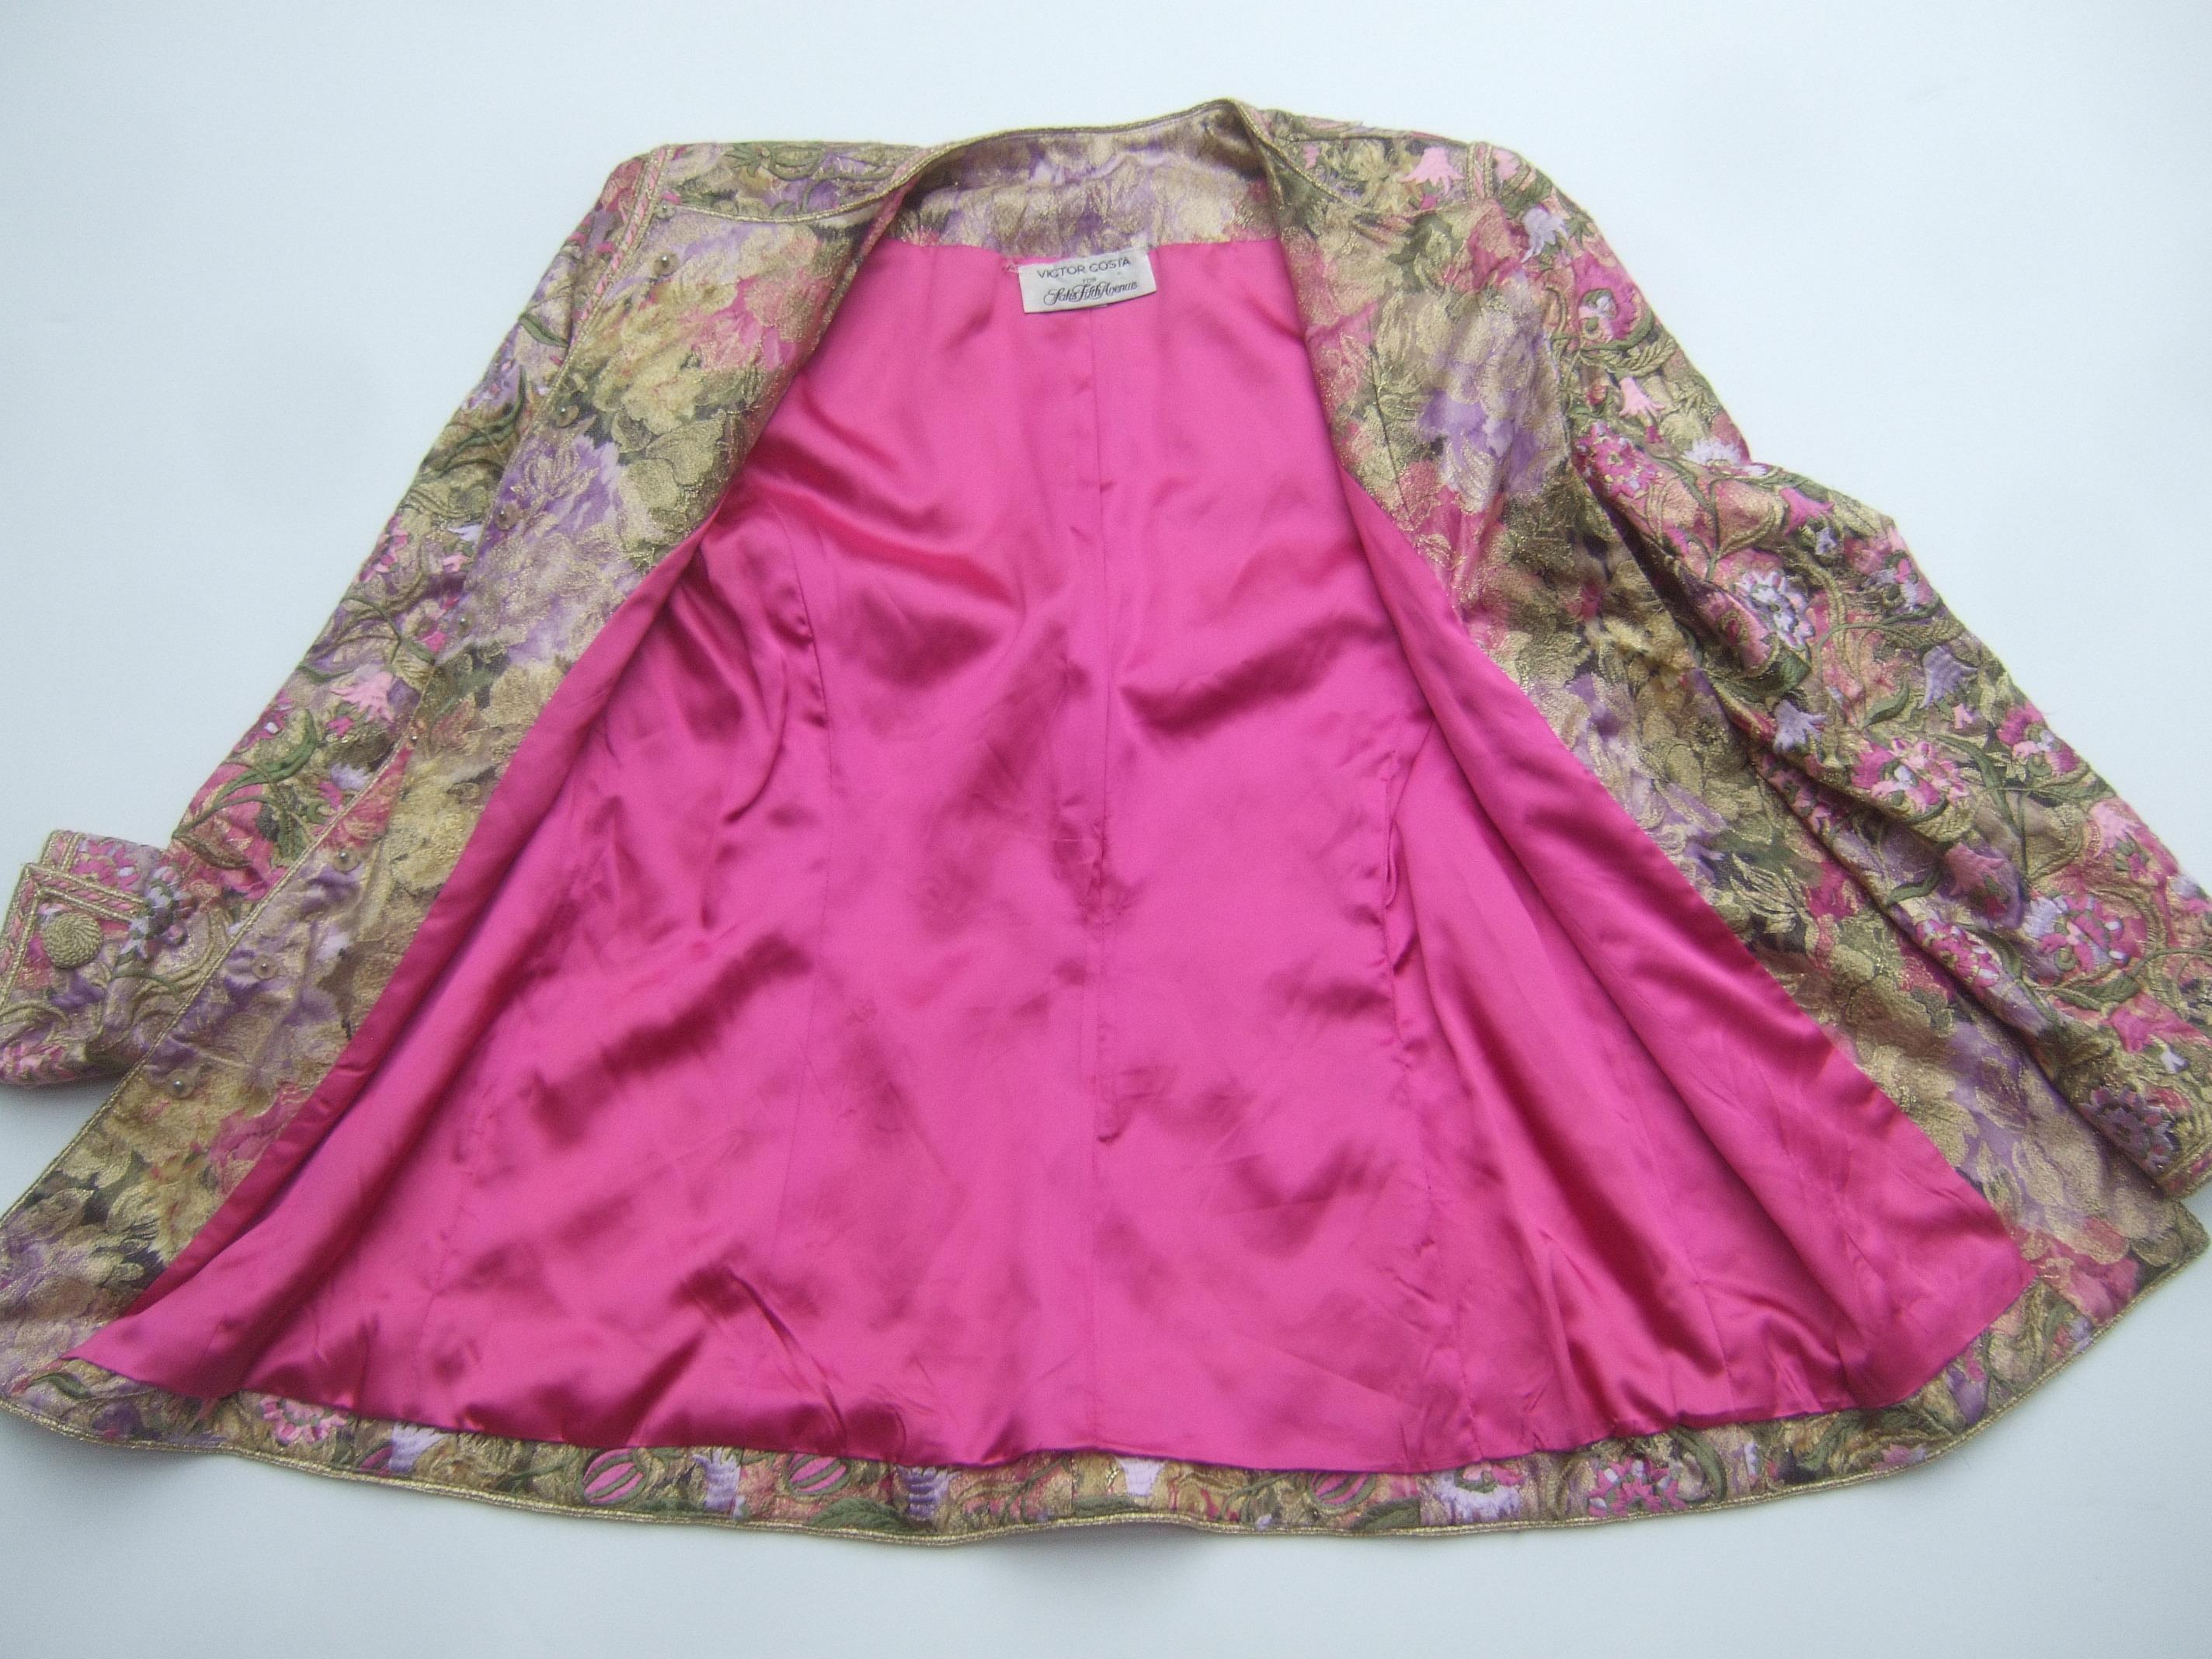 Saks Fifth Avenue Pastel Floral Embroidered Jacket by Victor Costa c 1980s 14